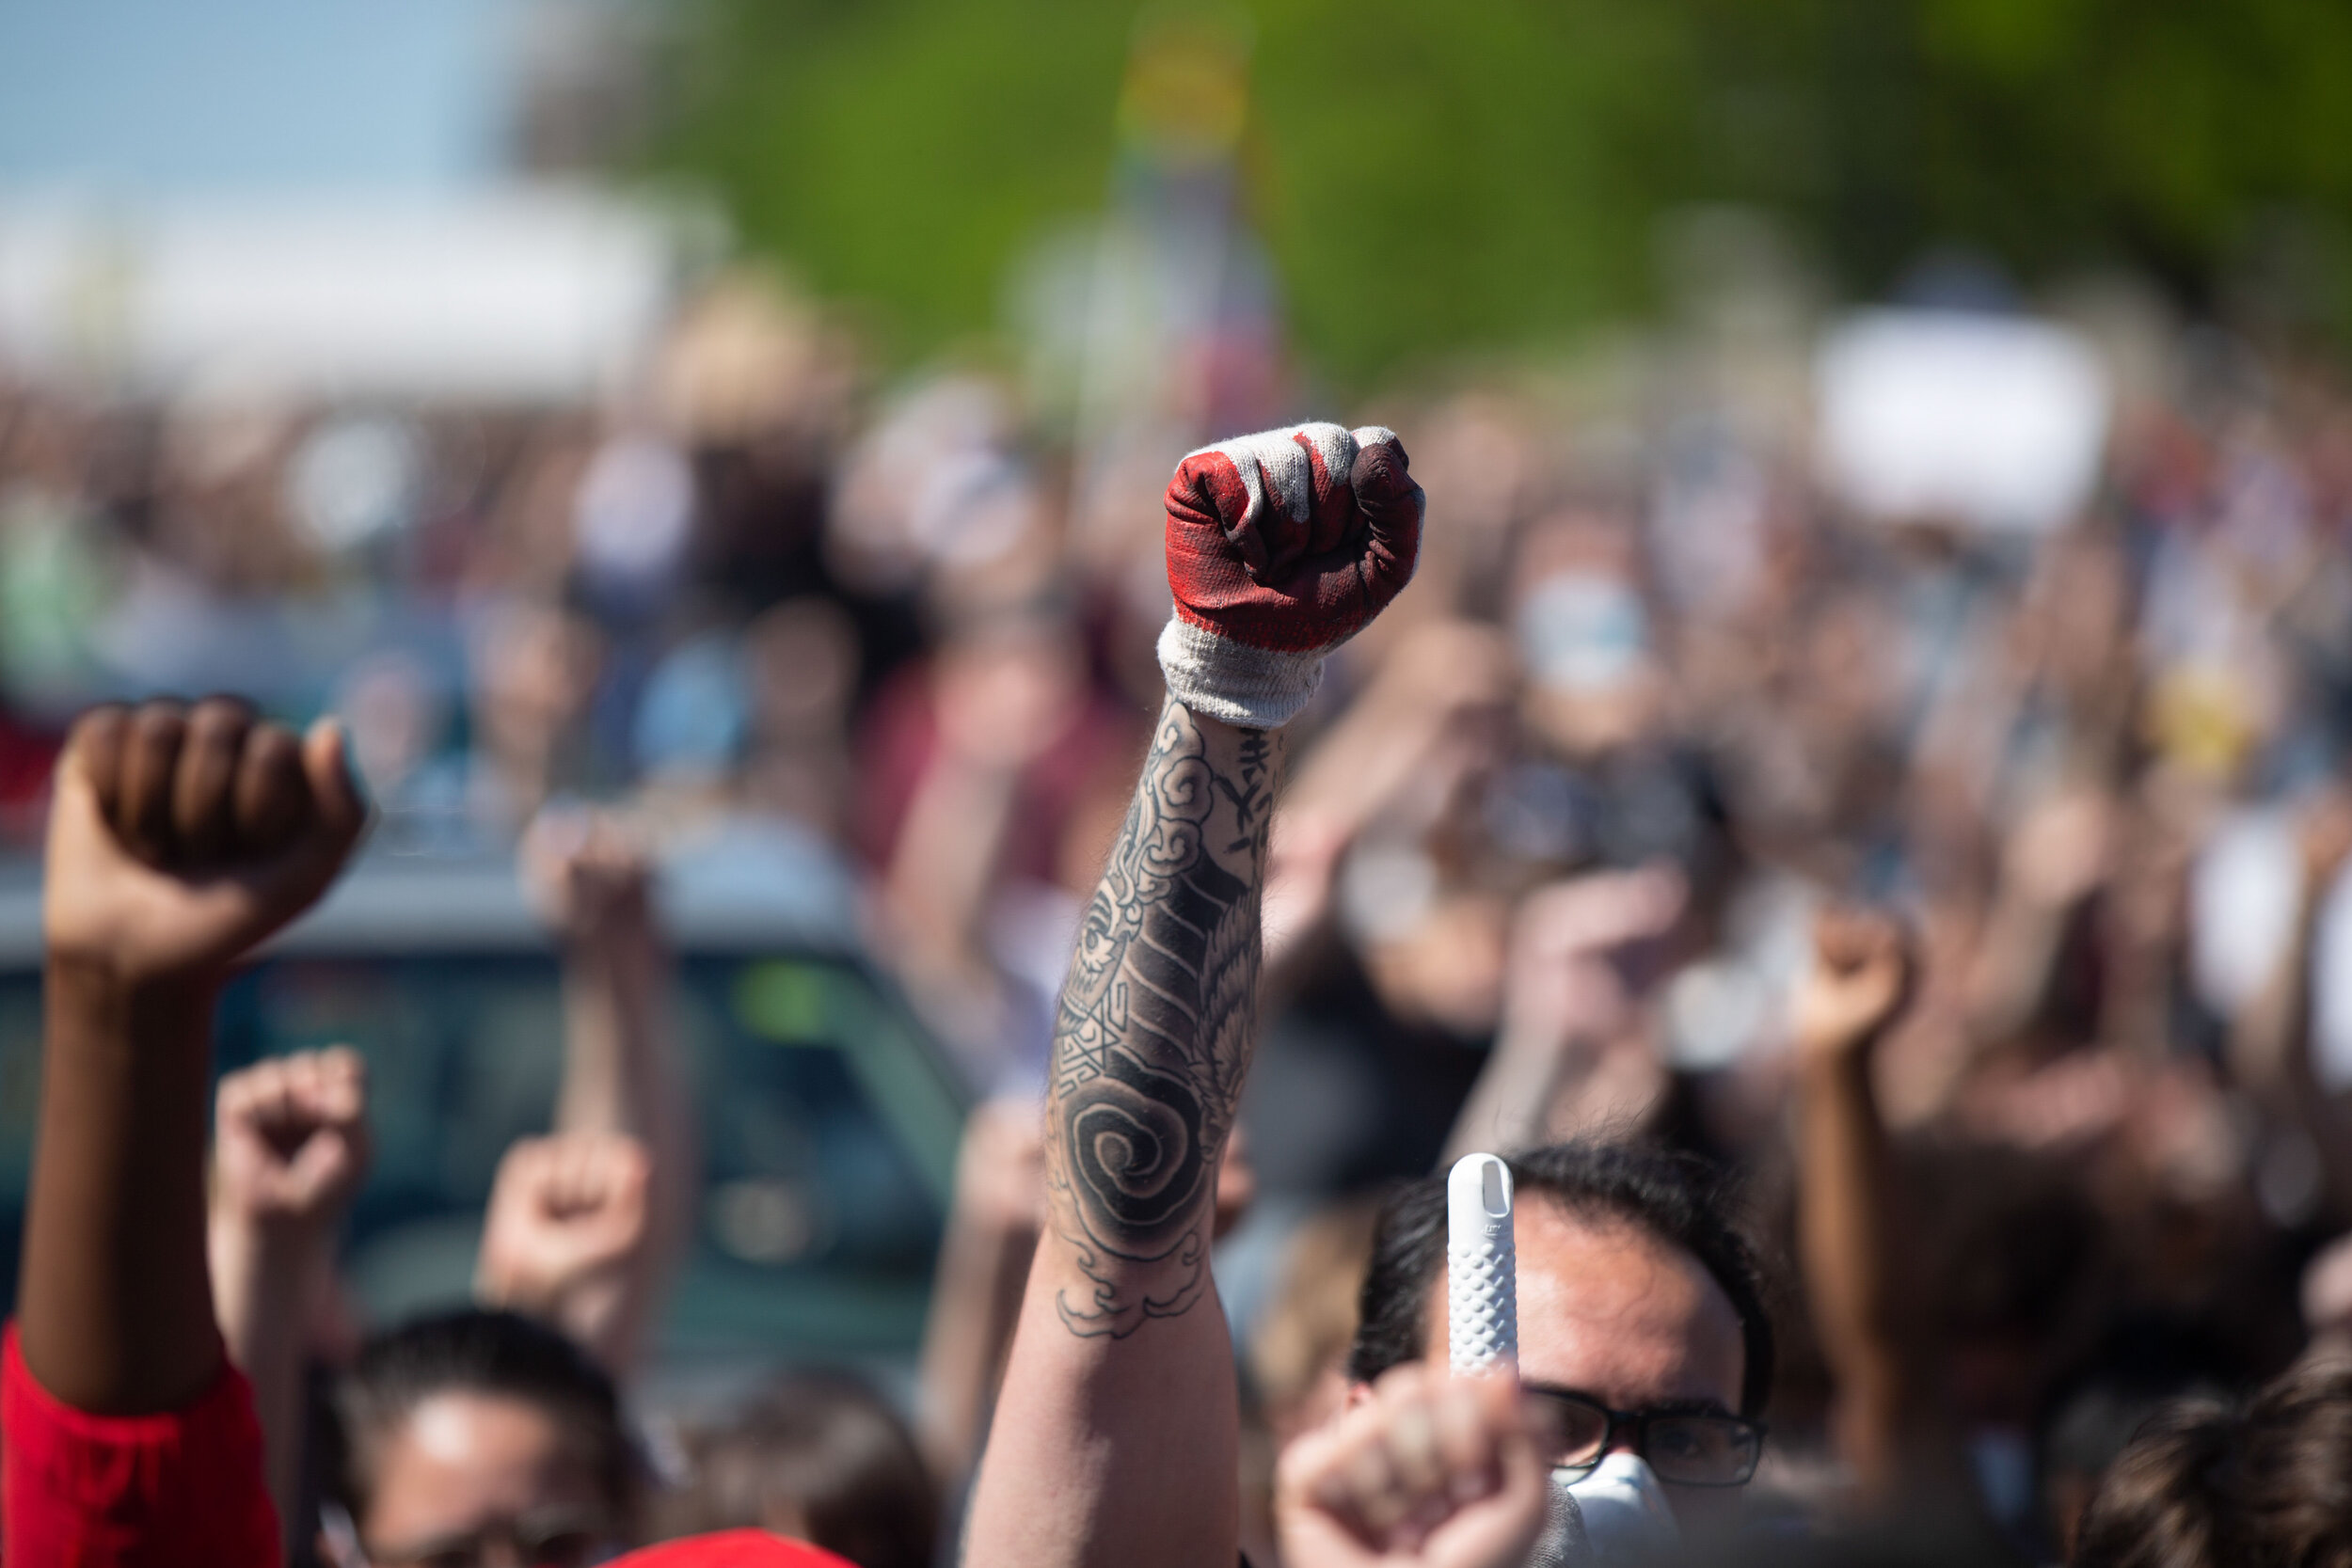  A man pits his fist in the air during a protest over the police killing of Geroge Floyd on May 30, 2020. Chris Juhn/Zuma. 